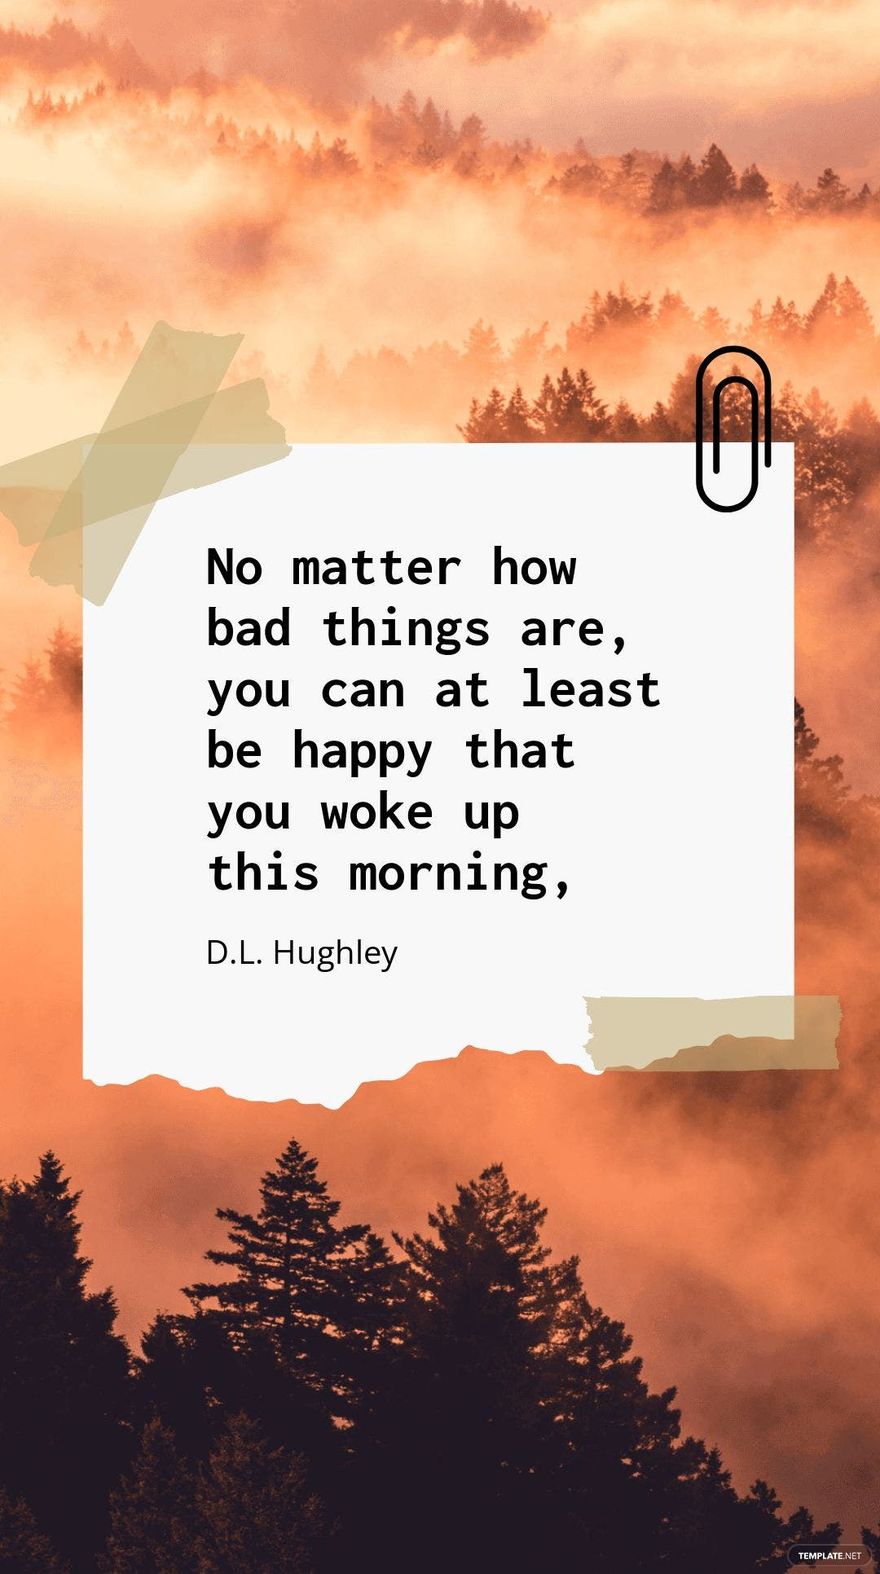 D.L. Hughley - No matter how bad things are, you can at least be happy that you woke up this morning.